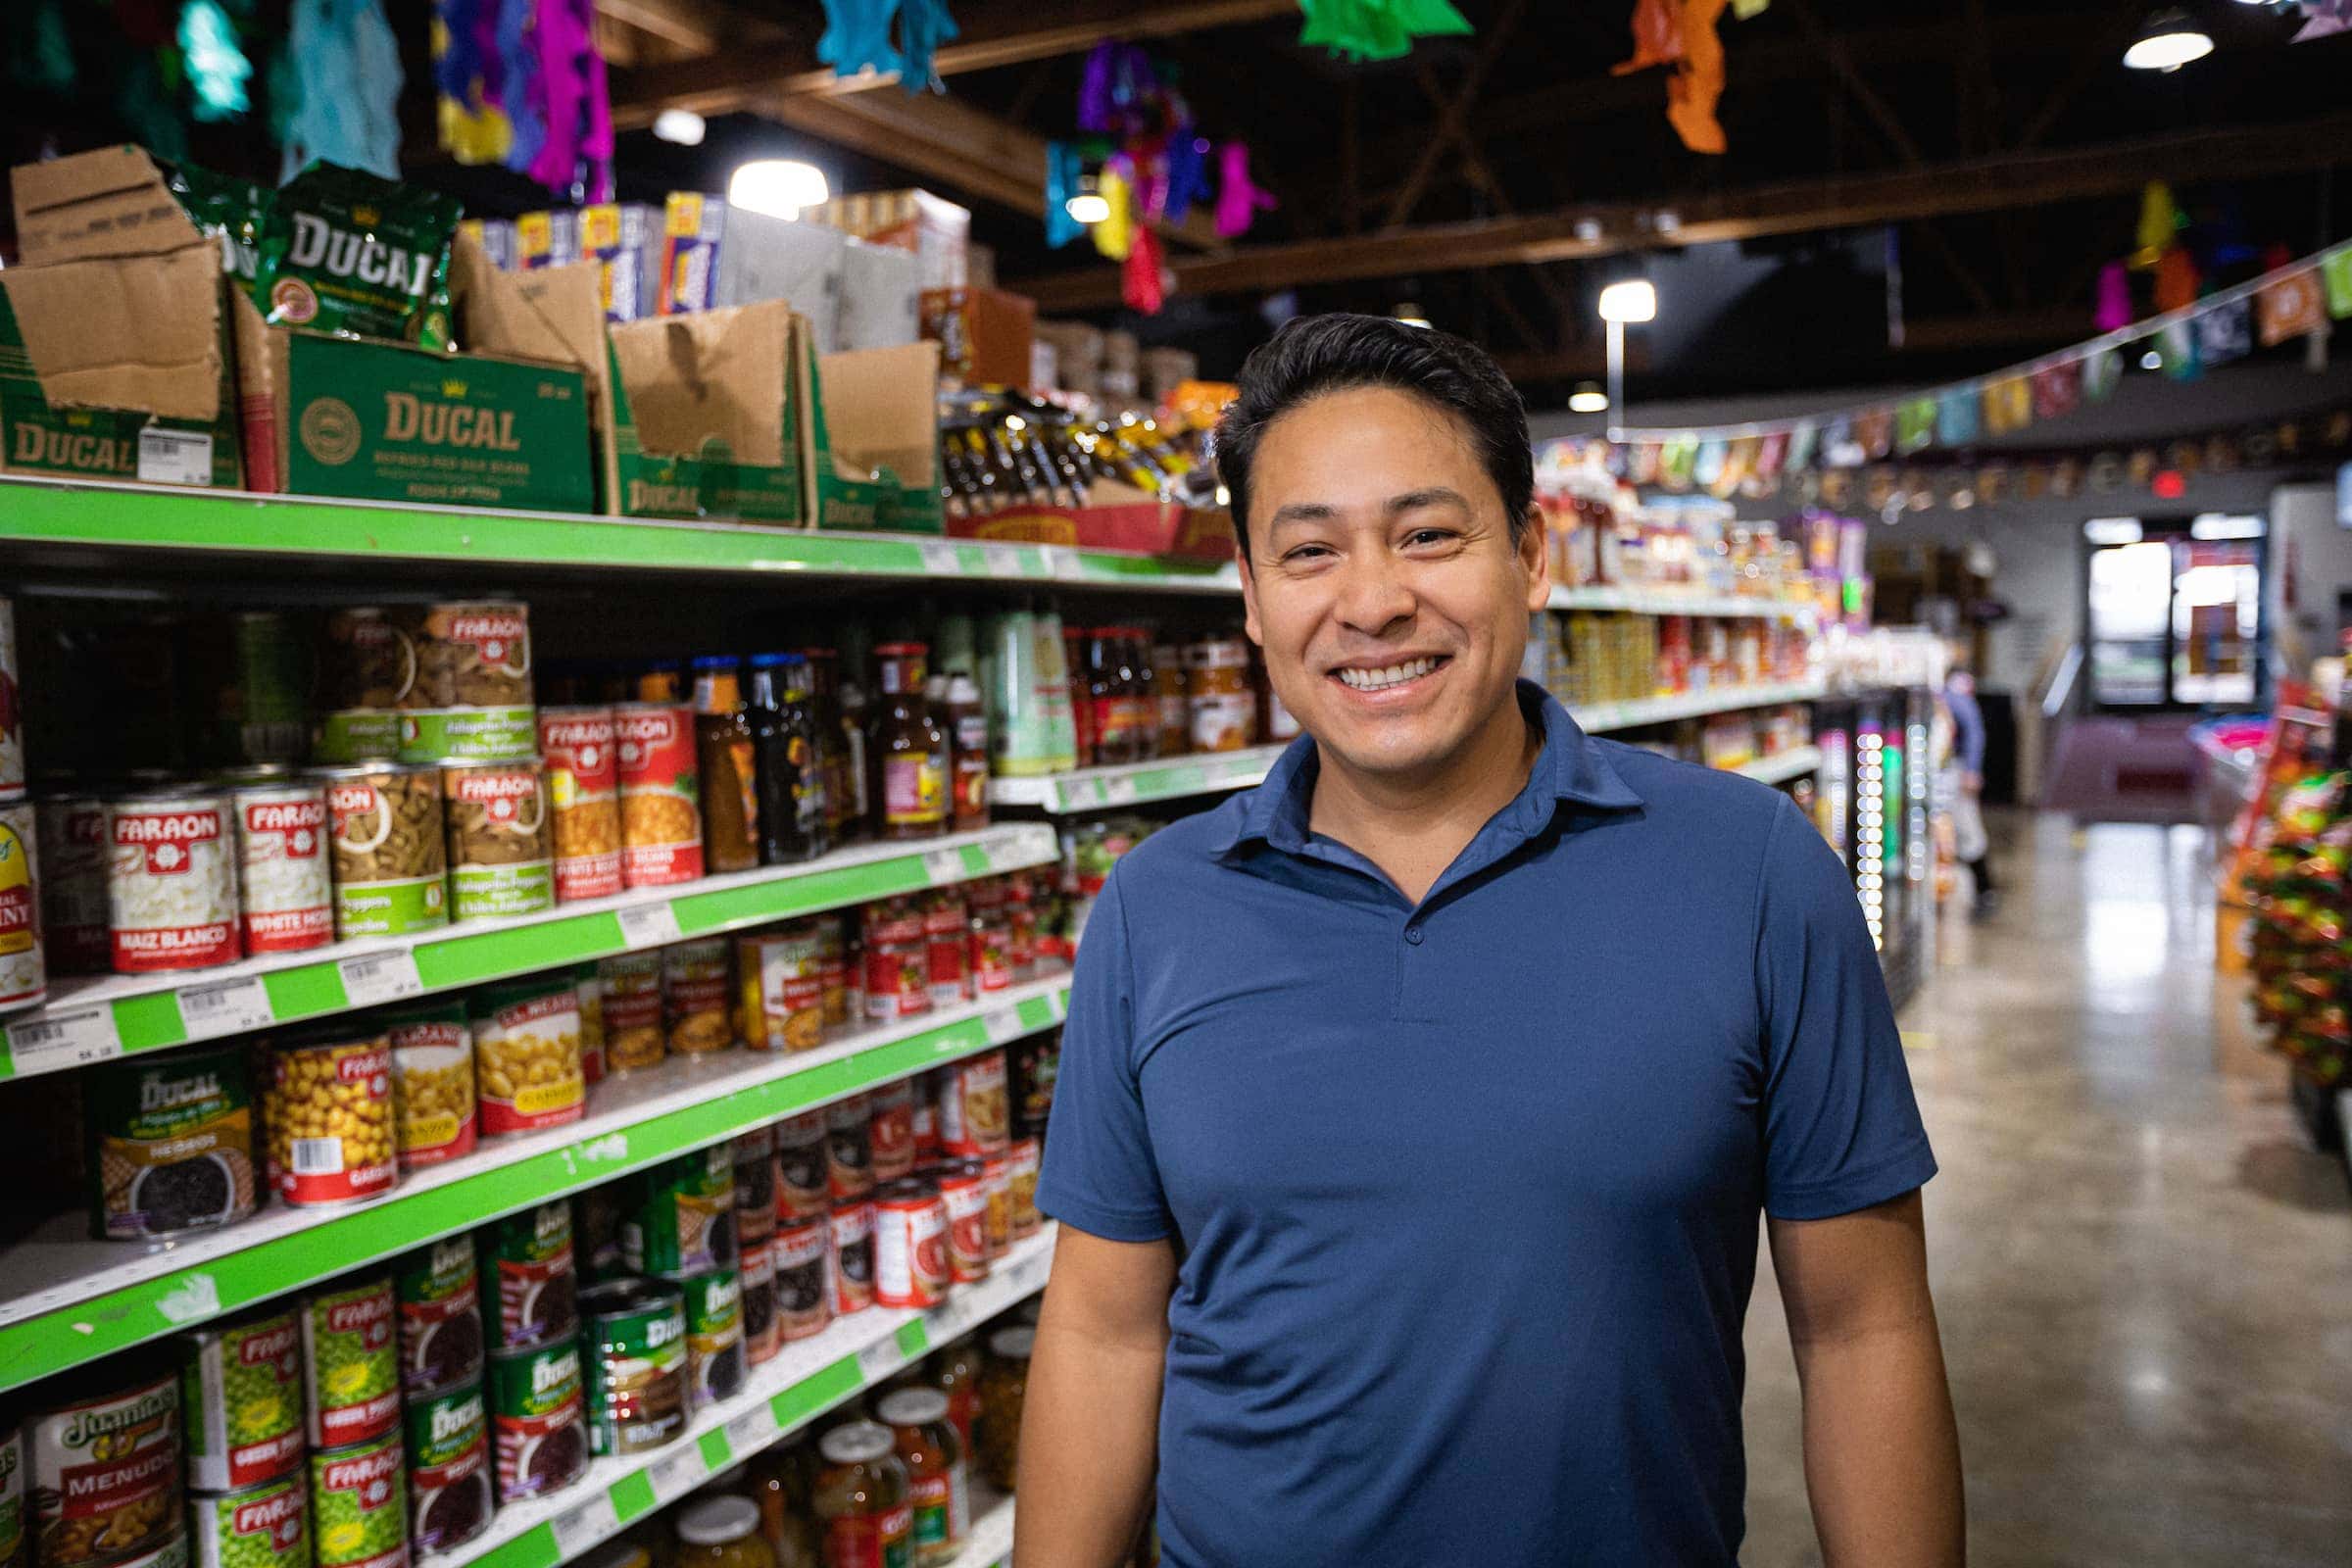 A man smiling to the camera in front of a grocery store shelf.